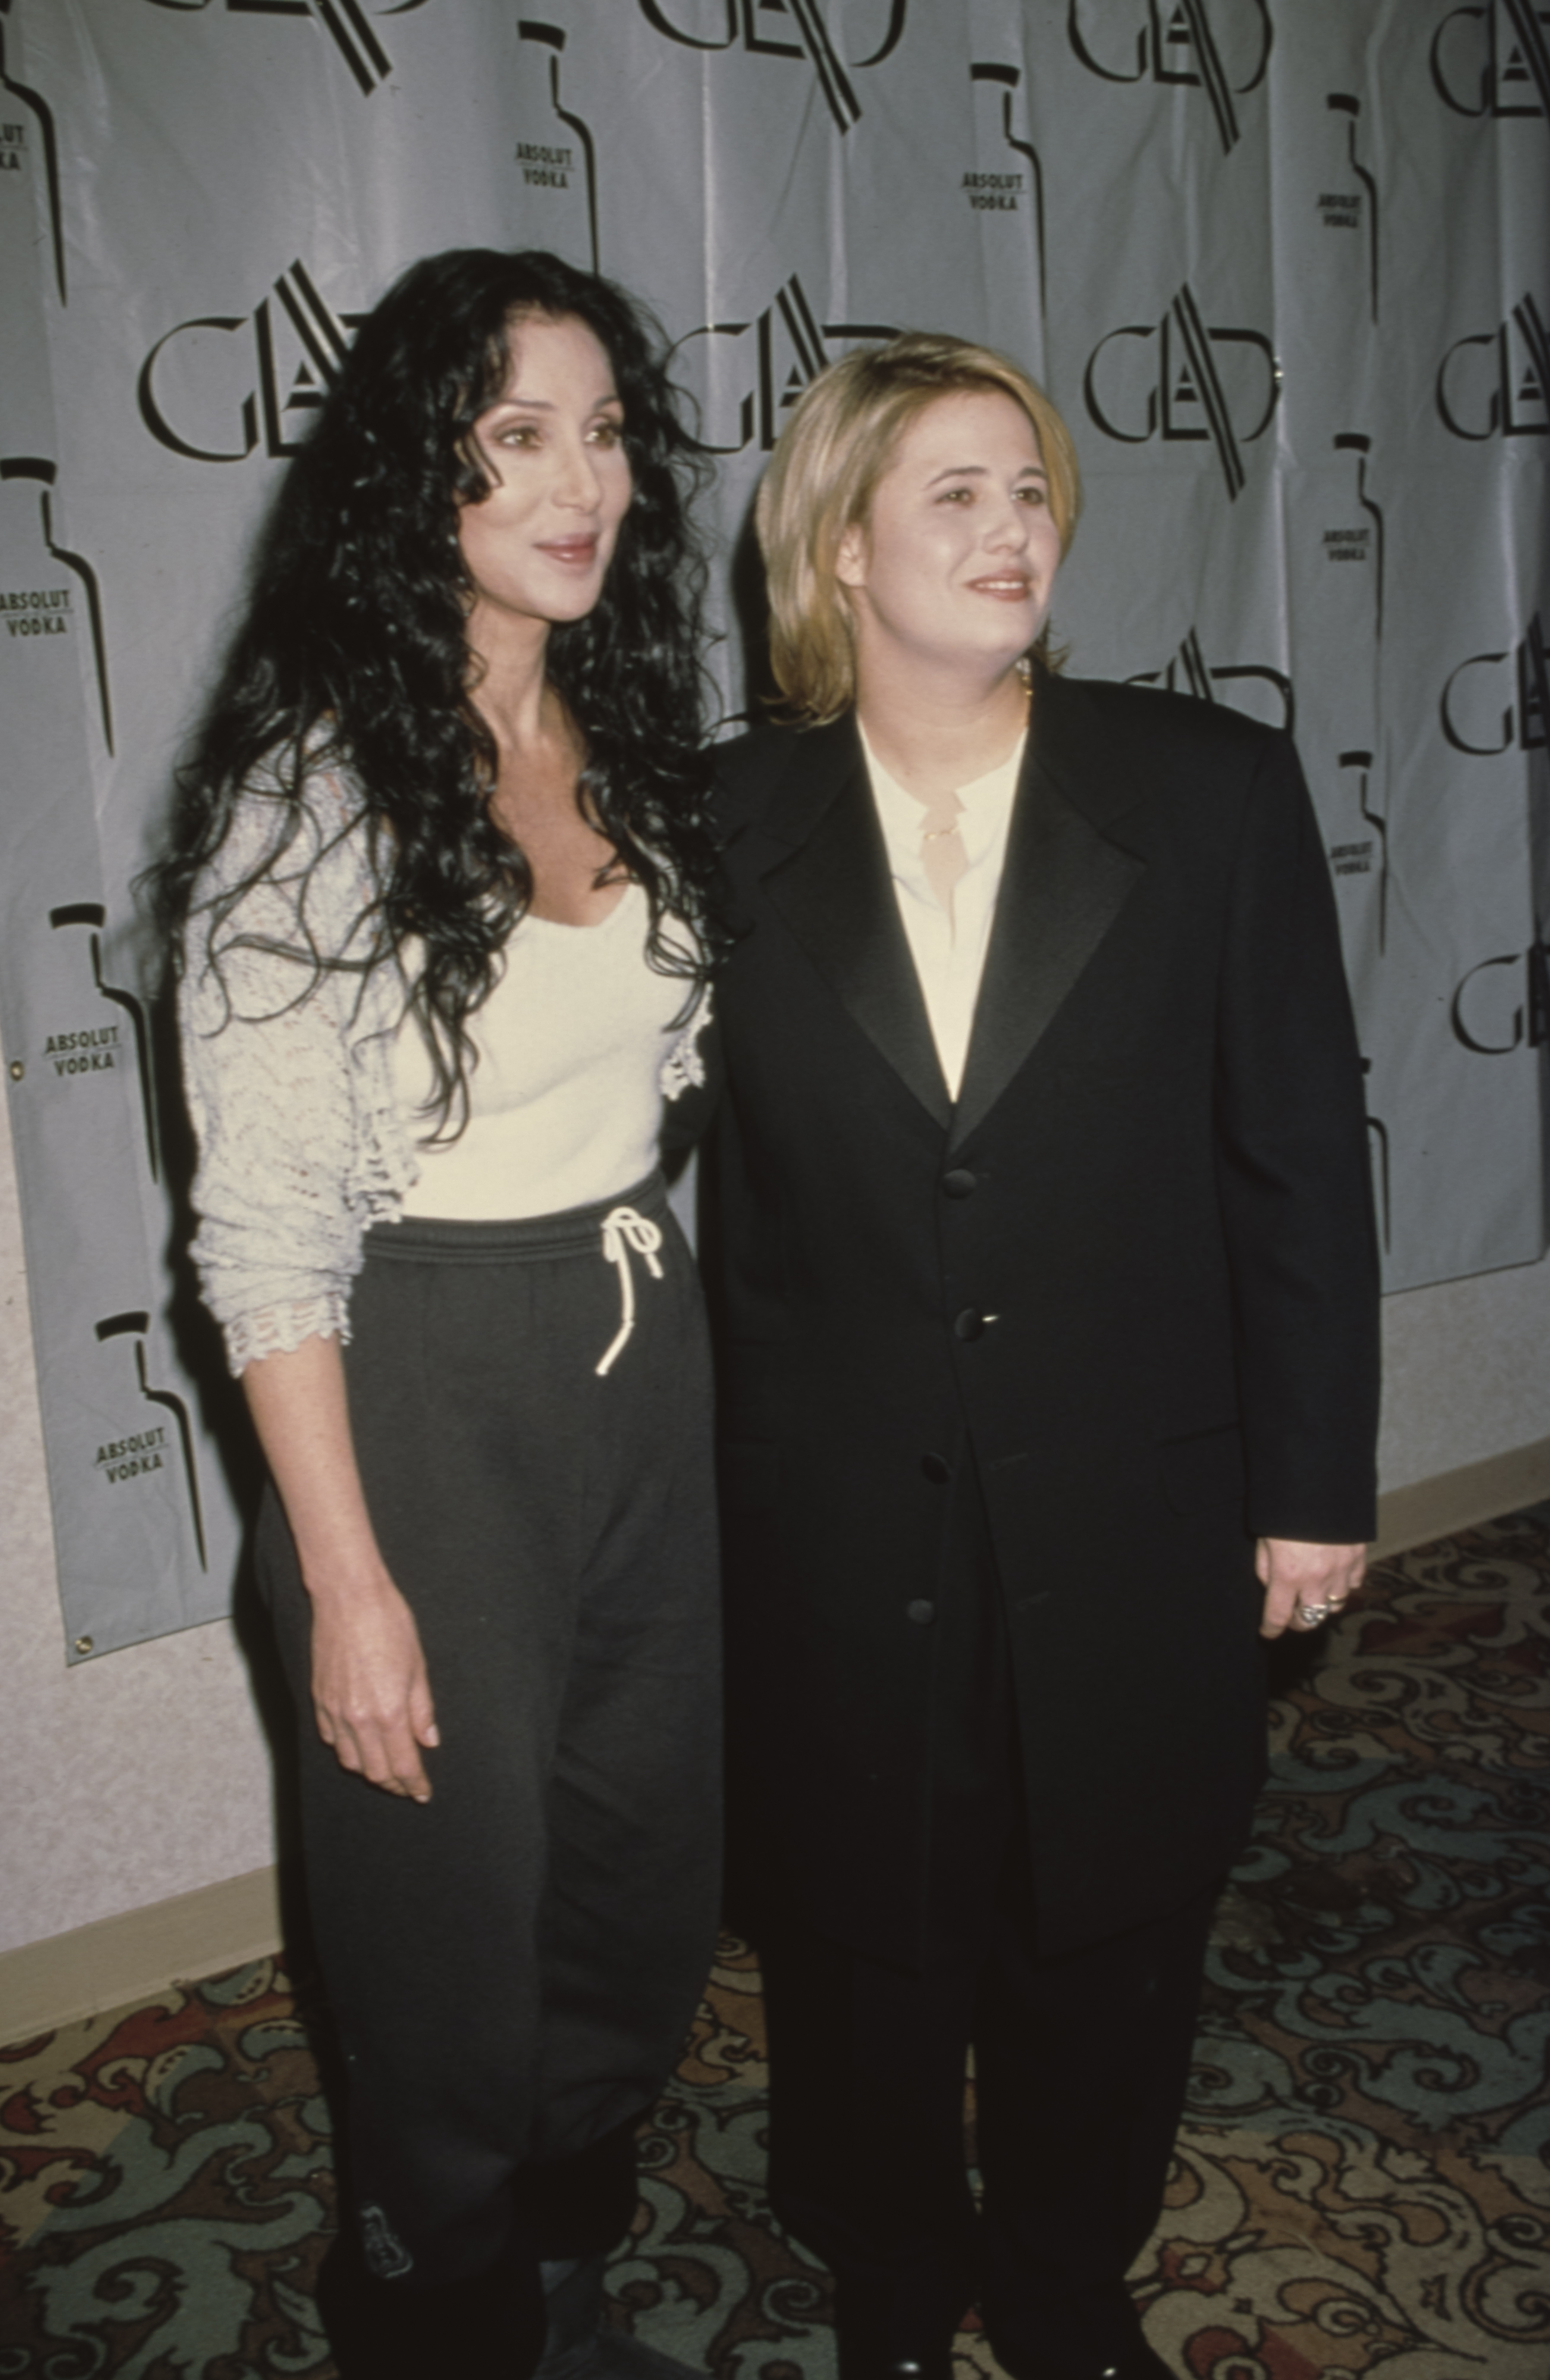 Cher and Chastity Bono attend the 19th Annual Glaad Media Awards at Century Plaza Hotel in Los Angeles, California, April 19, 1998. | Source: Getty Images